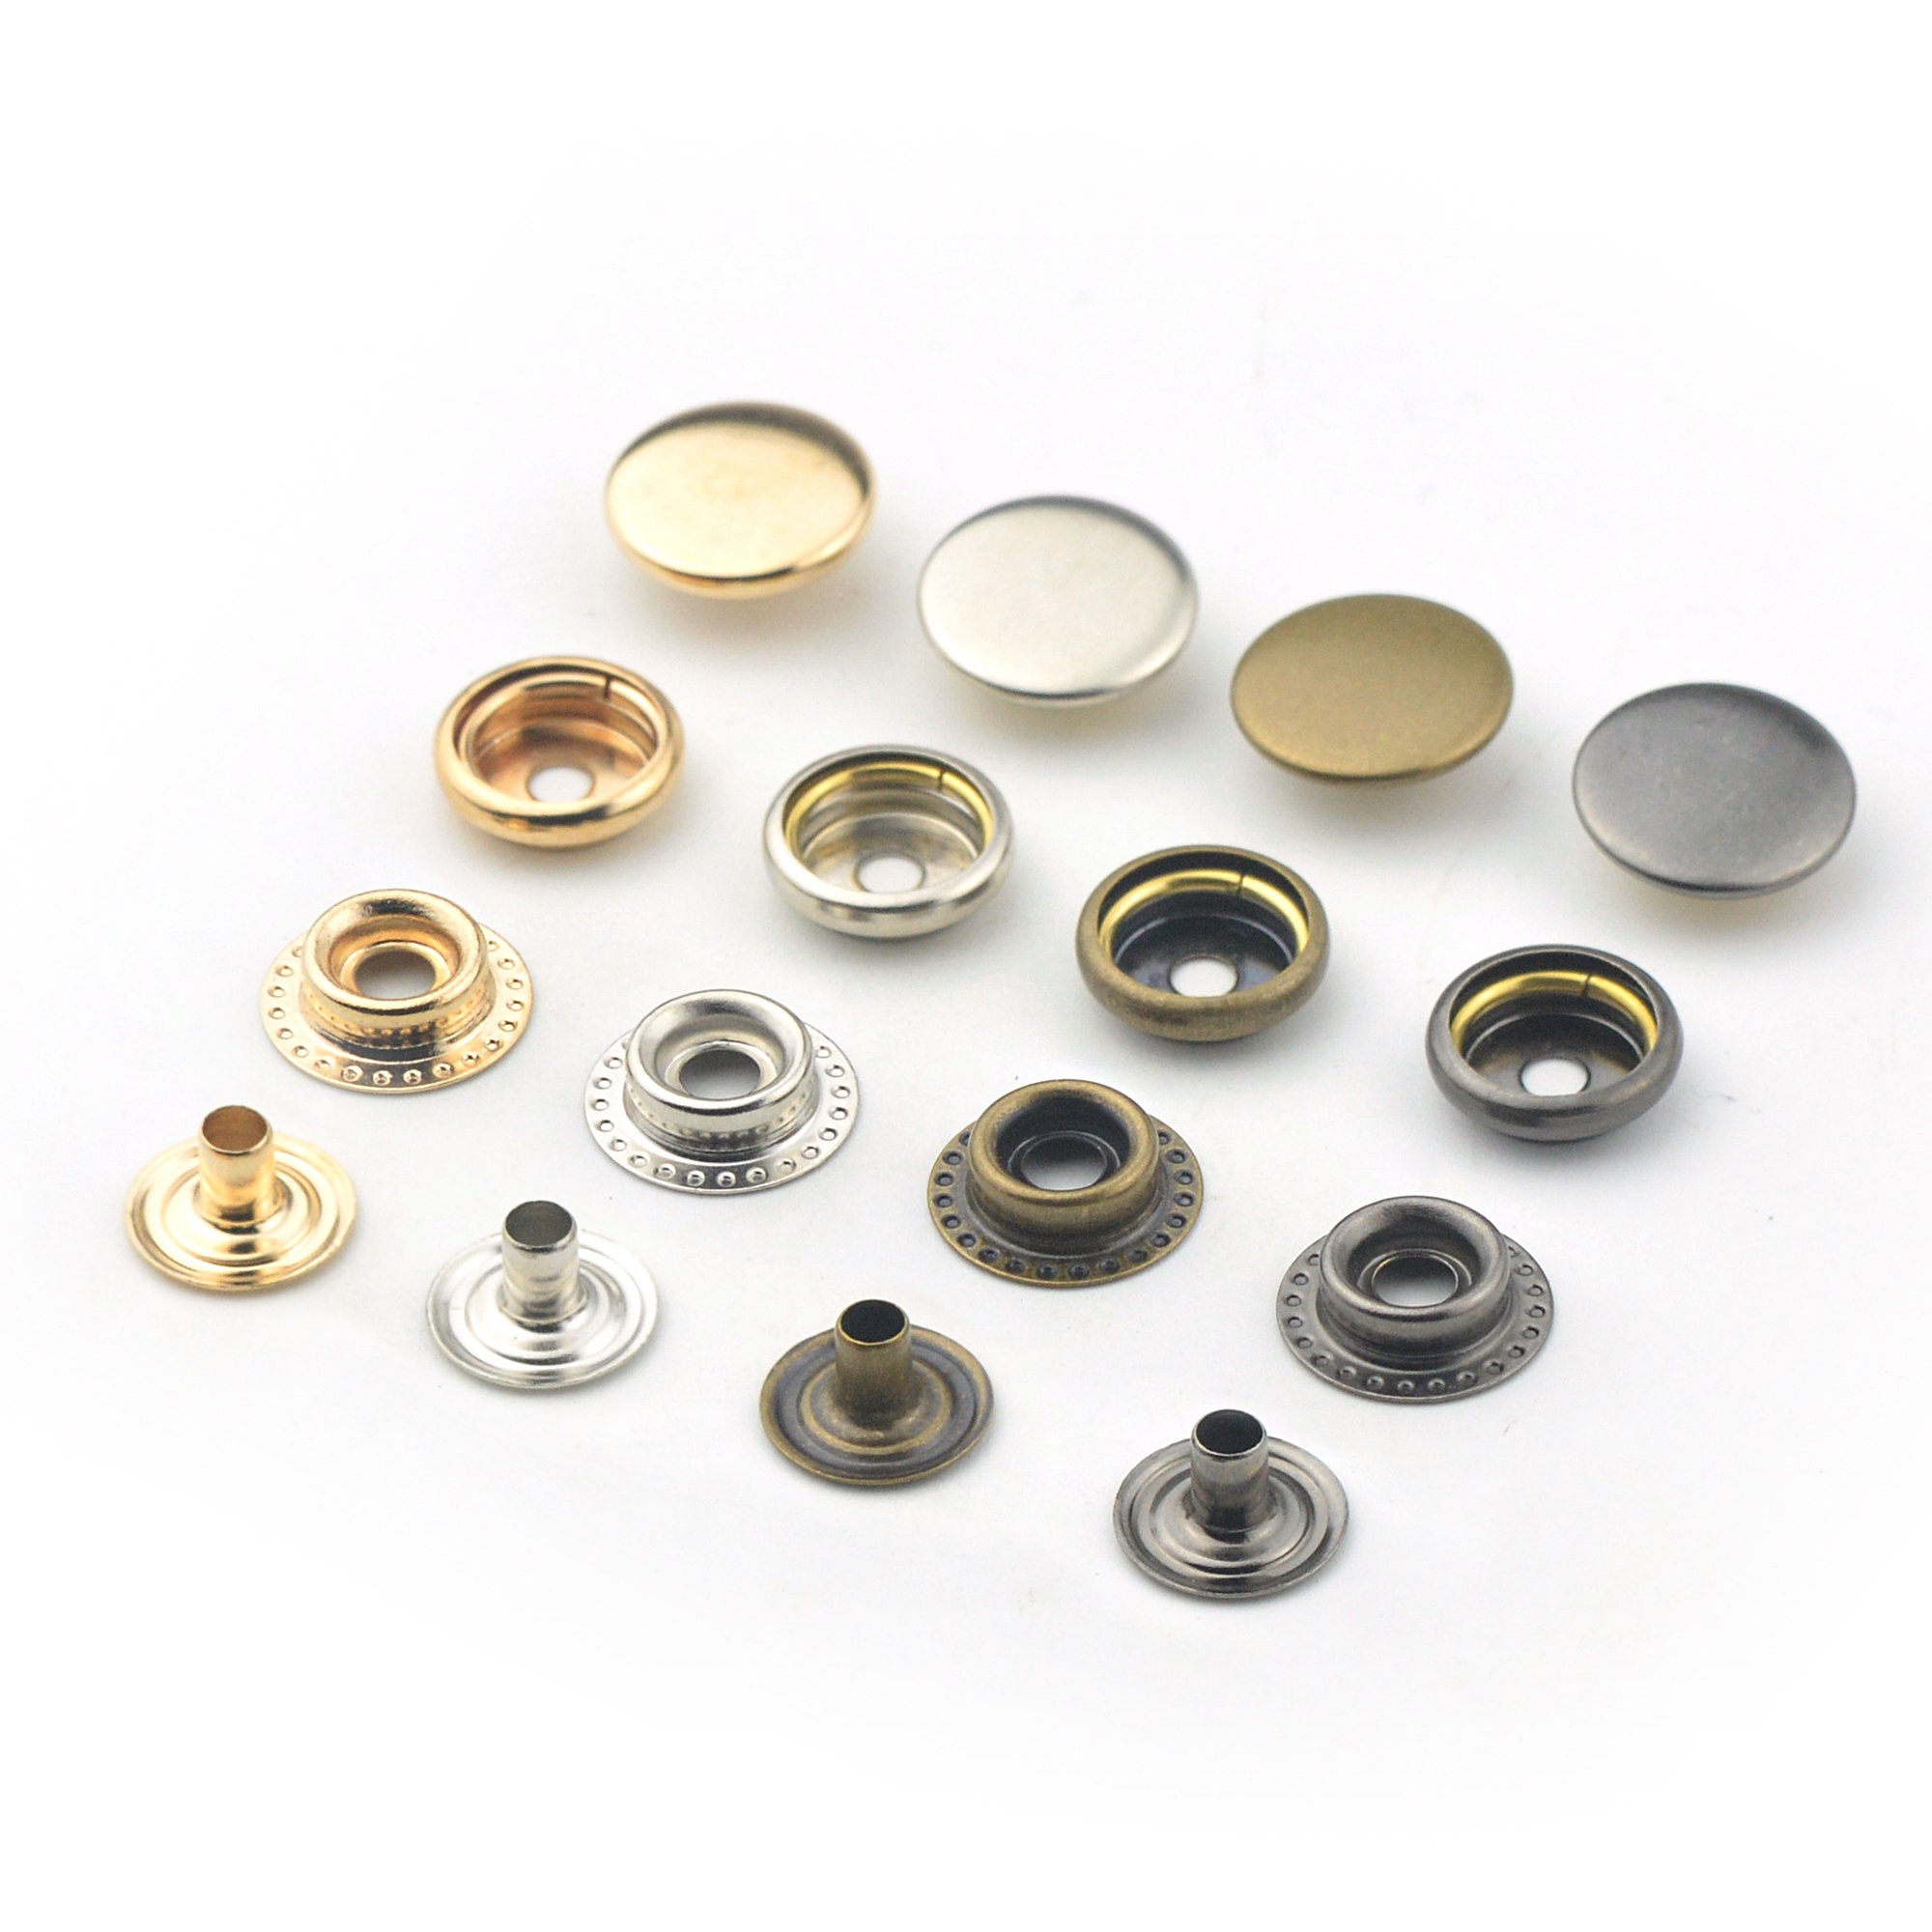 20set Solid Brass Snap Fasteners Metal Snaps Button 8/10/12.5/15mm | WUTA